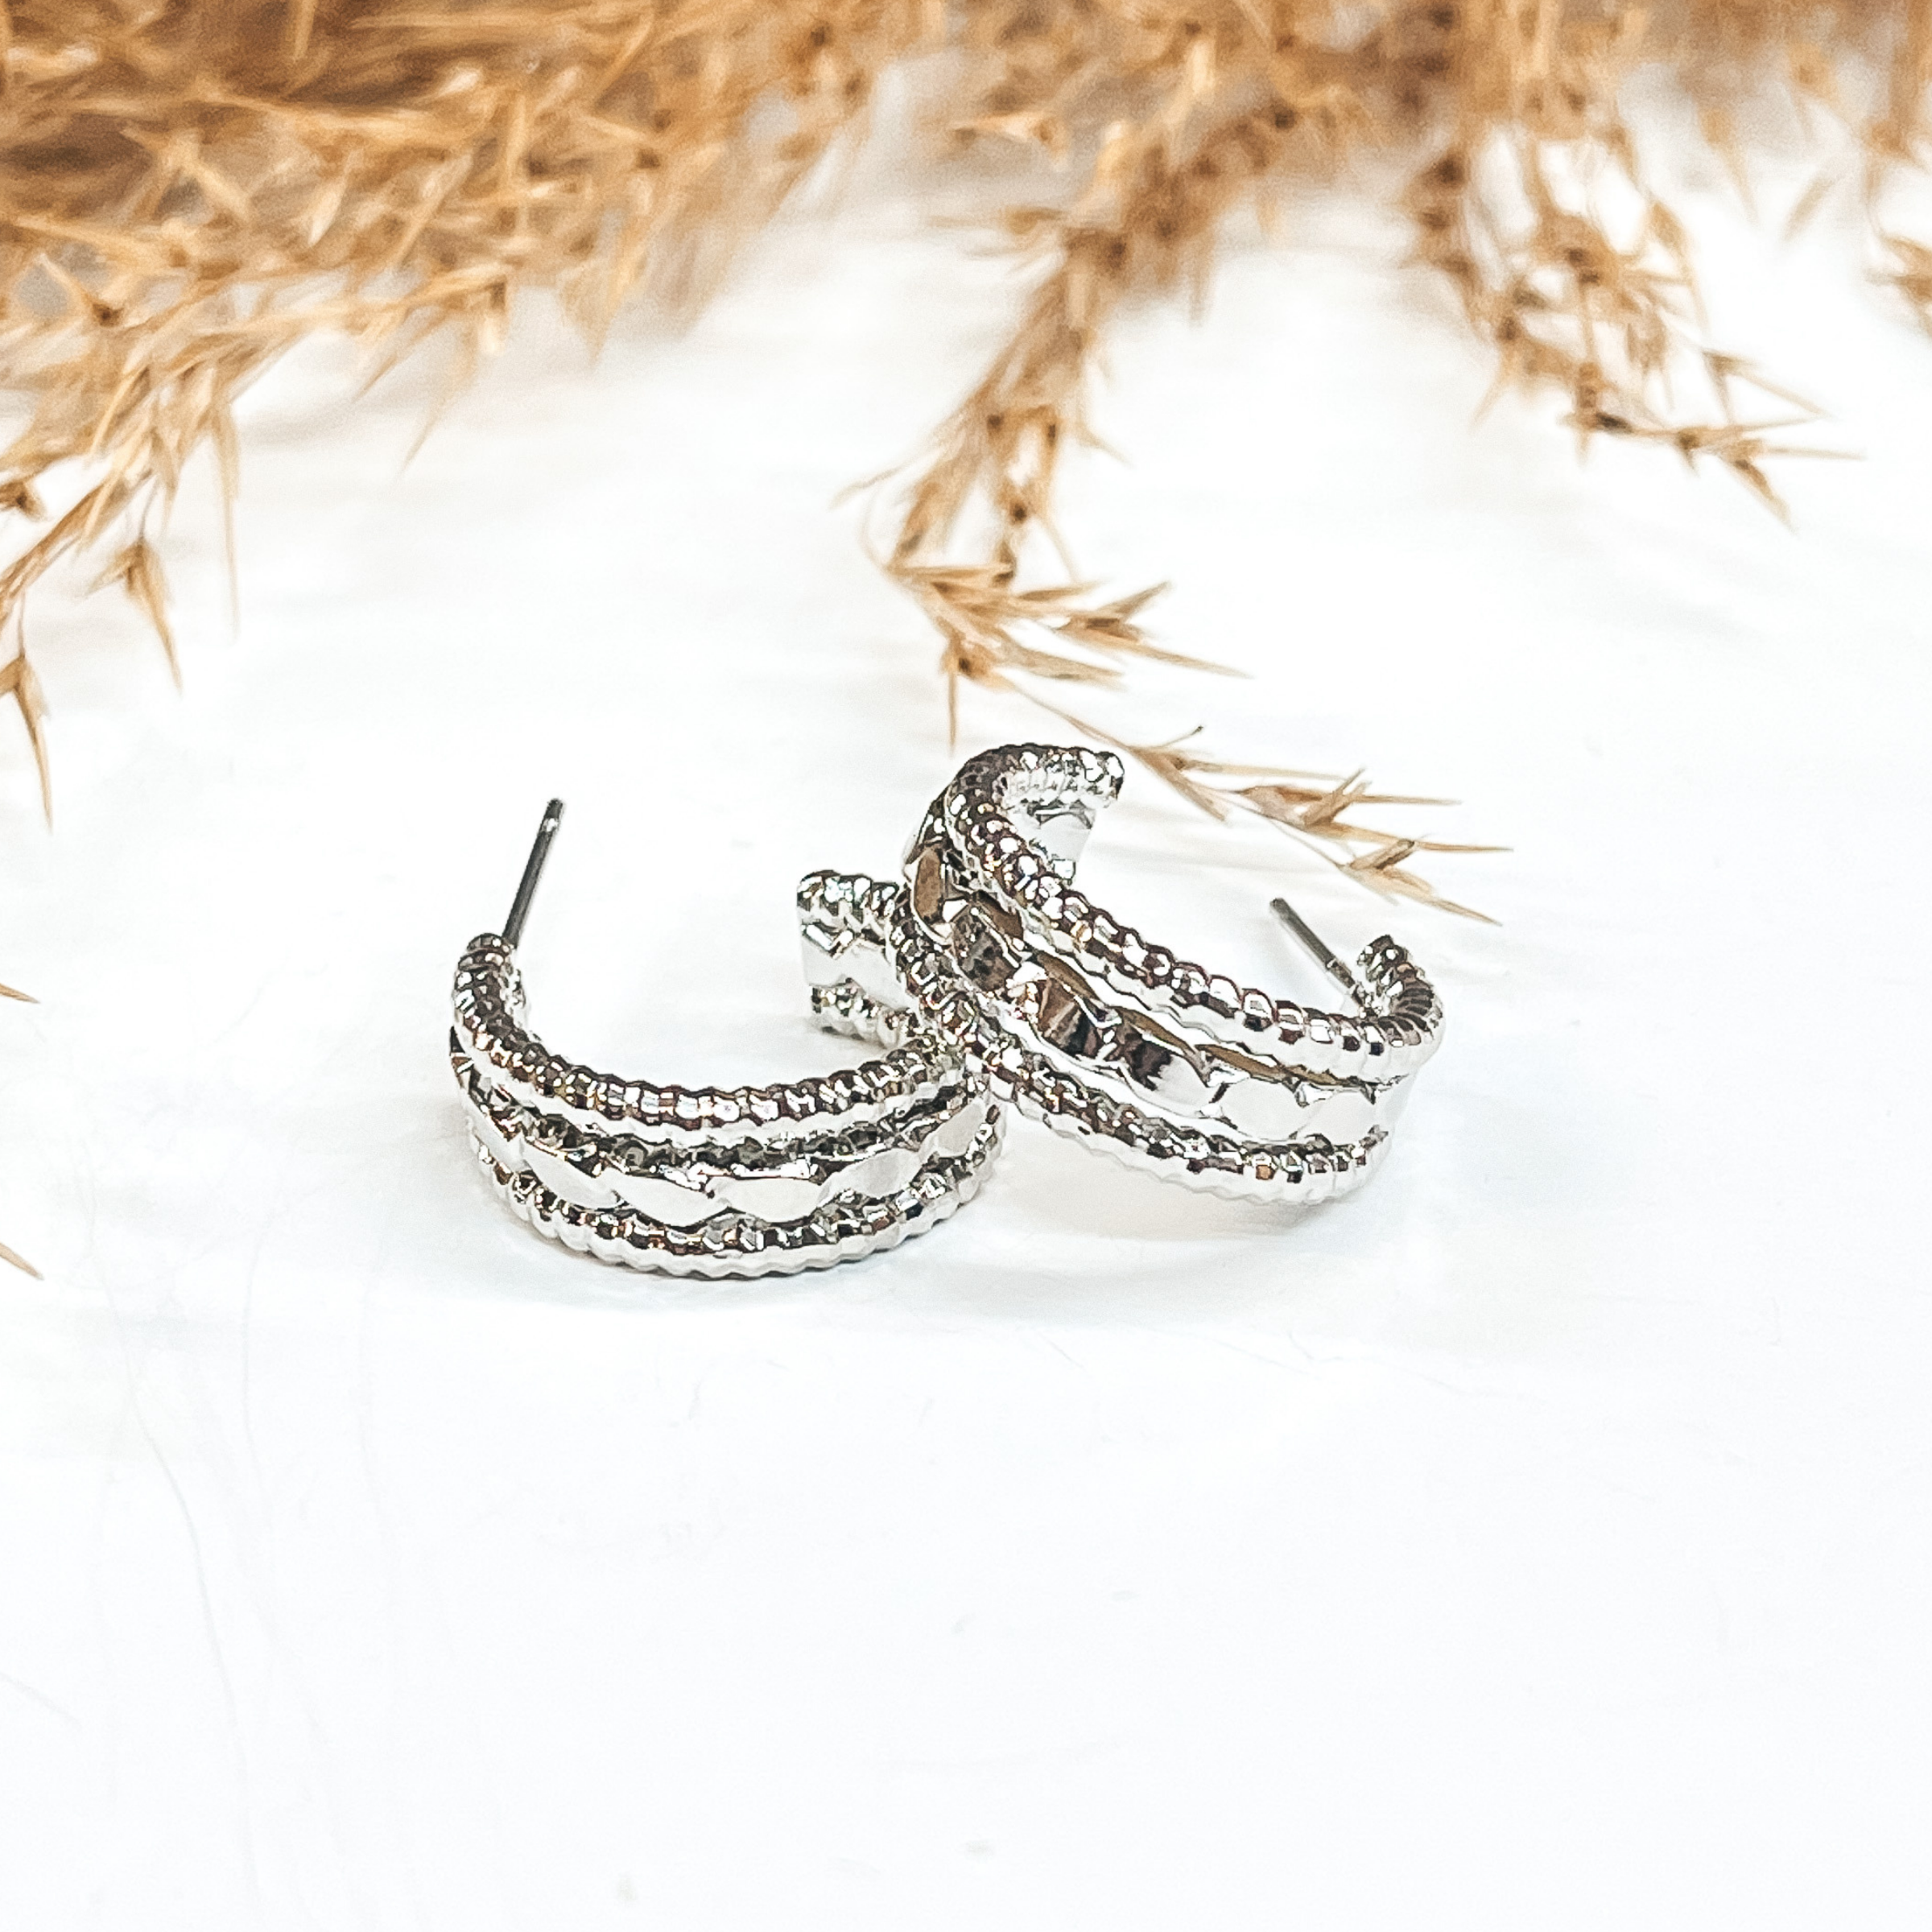 Mini open ended hoop earrings in silver with different rope textures.  These earrings are pictured on a white background  with a brown floral plant in the back as decor.